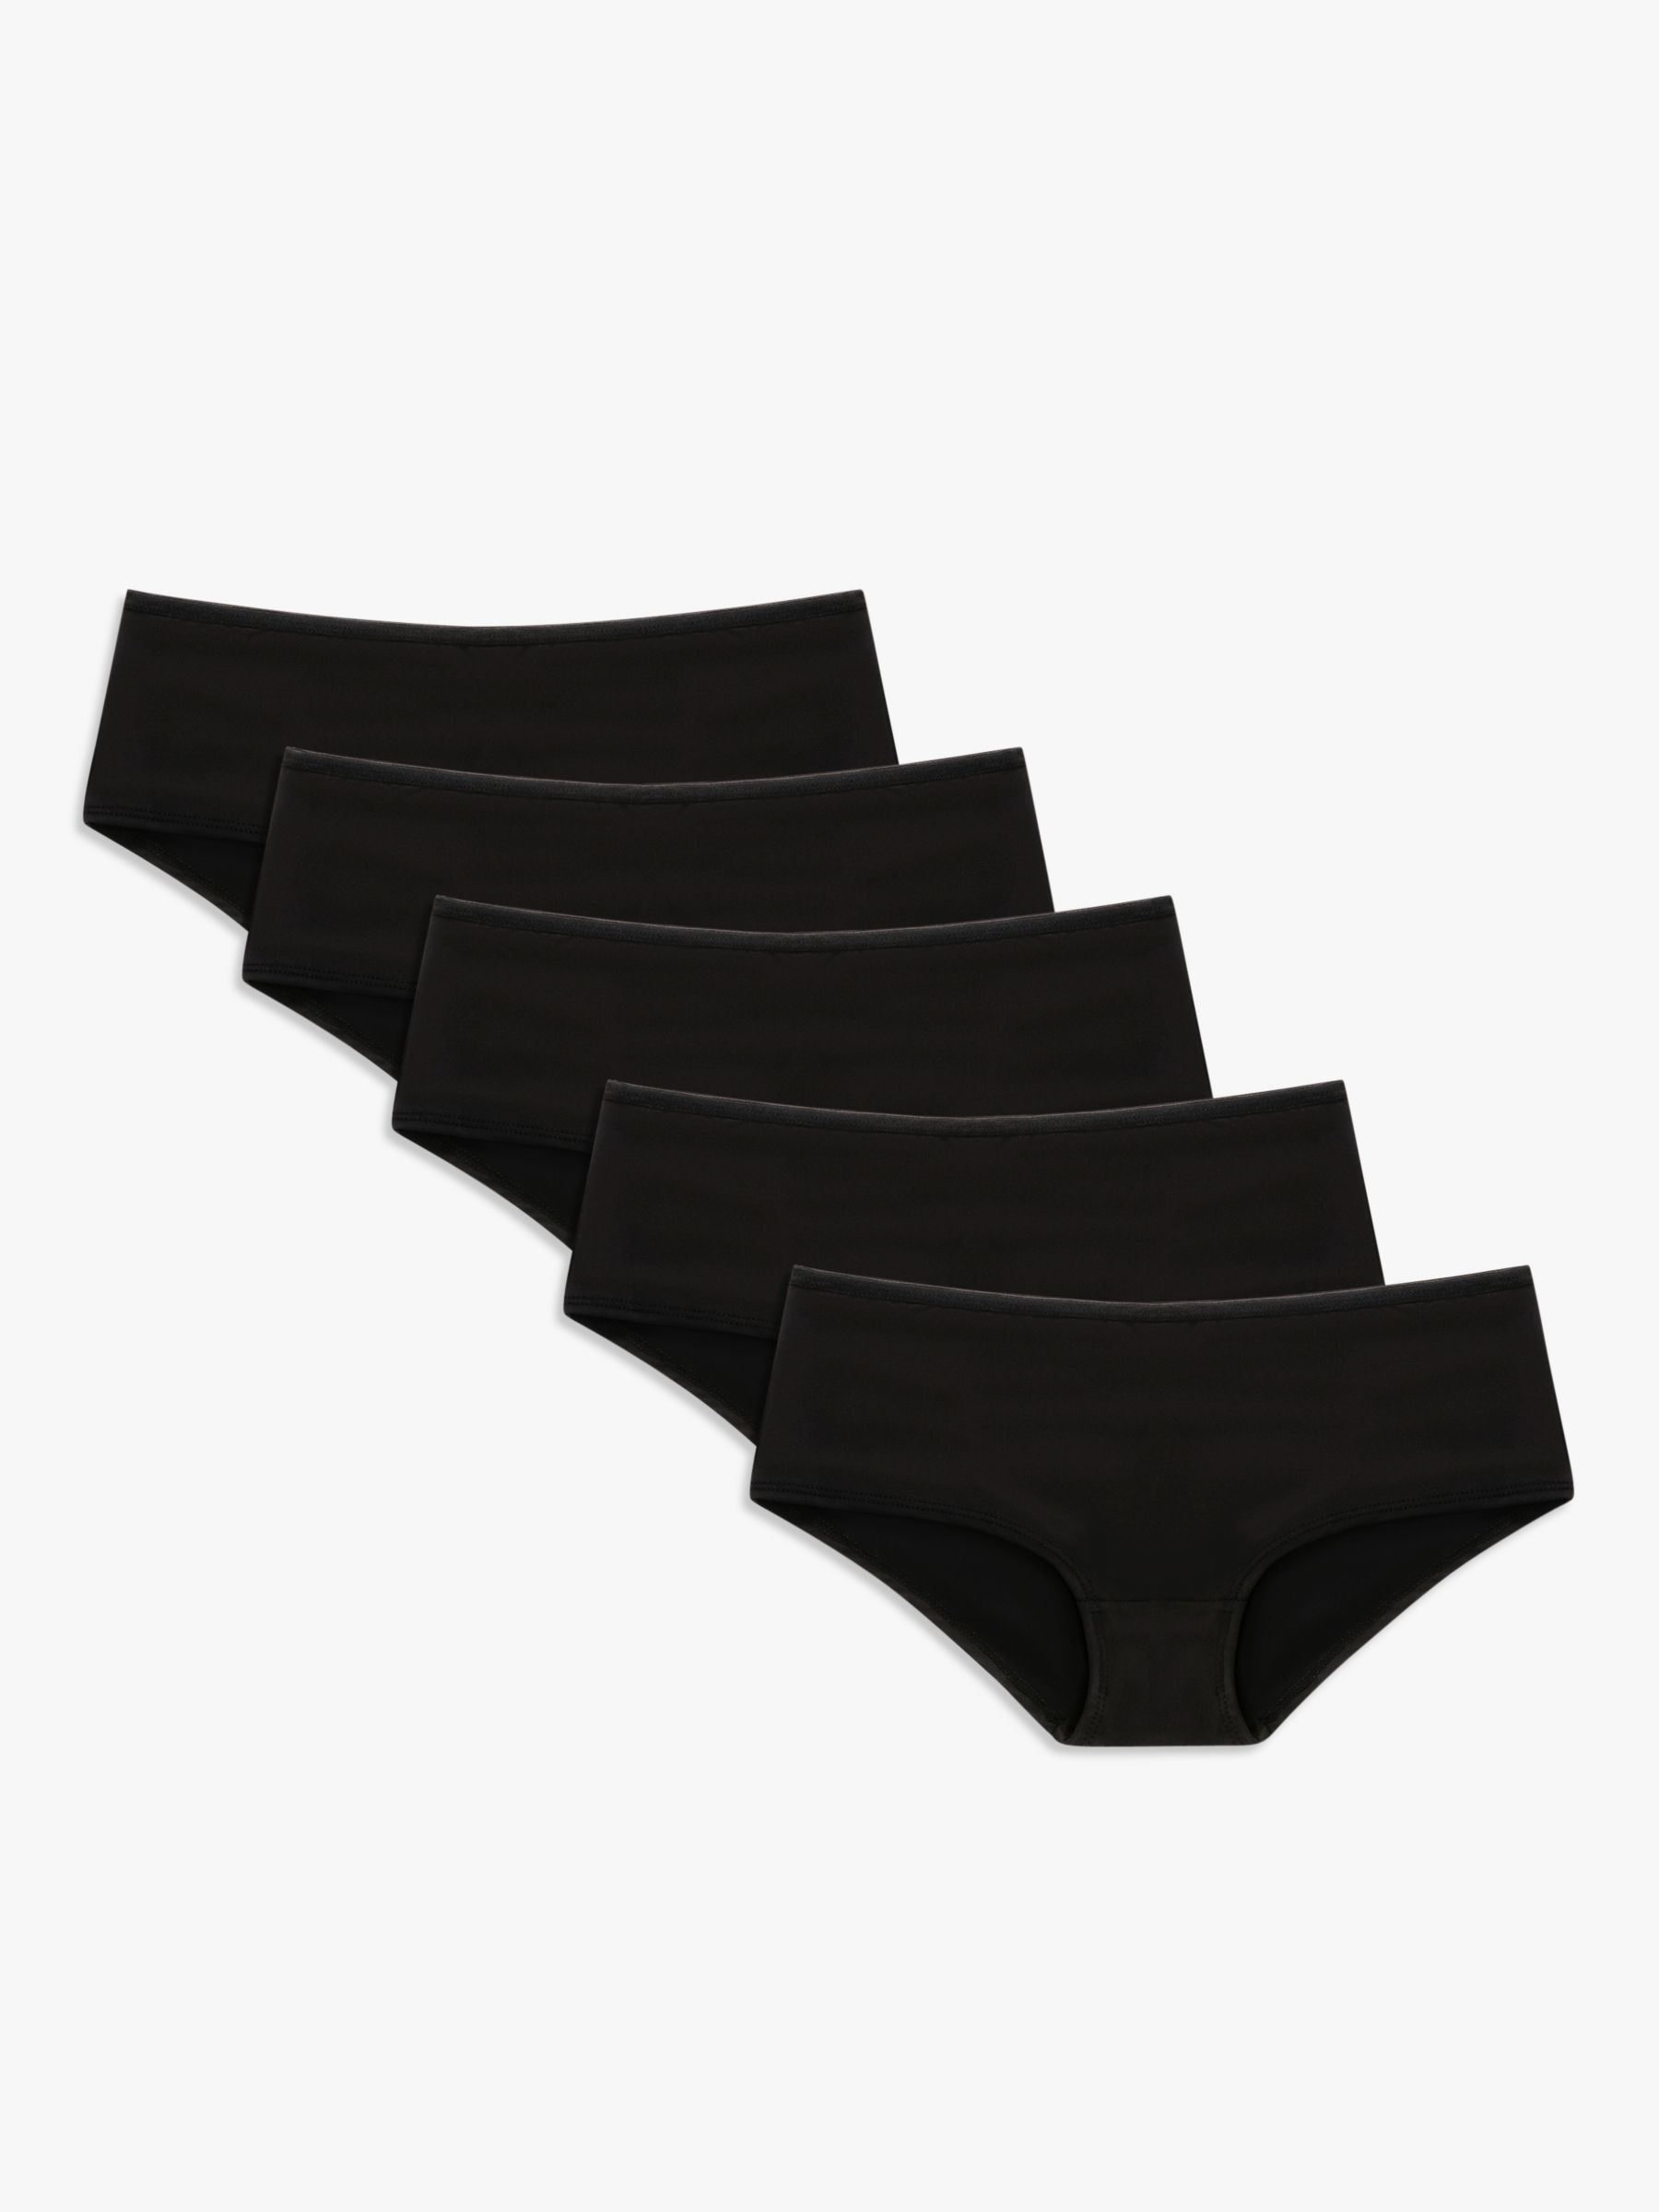 Buy John Lewis ANYDAY Microfibre Short Knickers, Pack of 5 Online at johnlewis.com